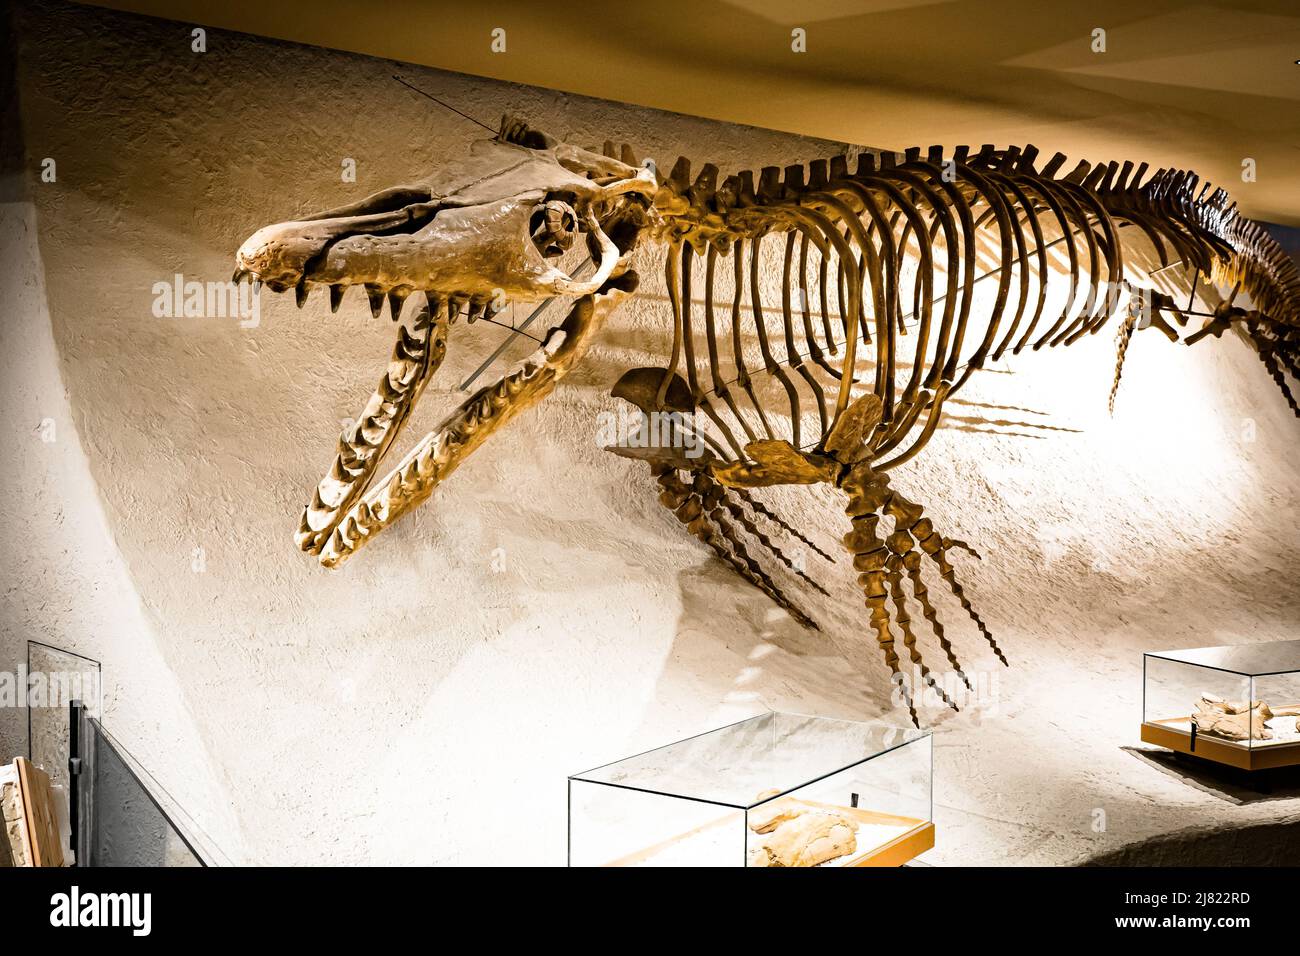 View of a mounted Mosasaurus fossil with open jaws and large teeth at the Natural History Museum in Maastricht, the Netherlands Stock Photo